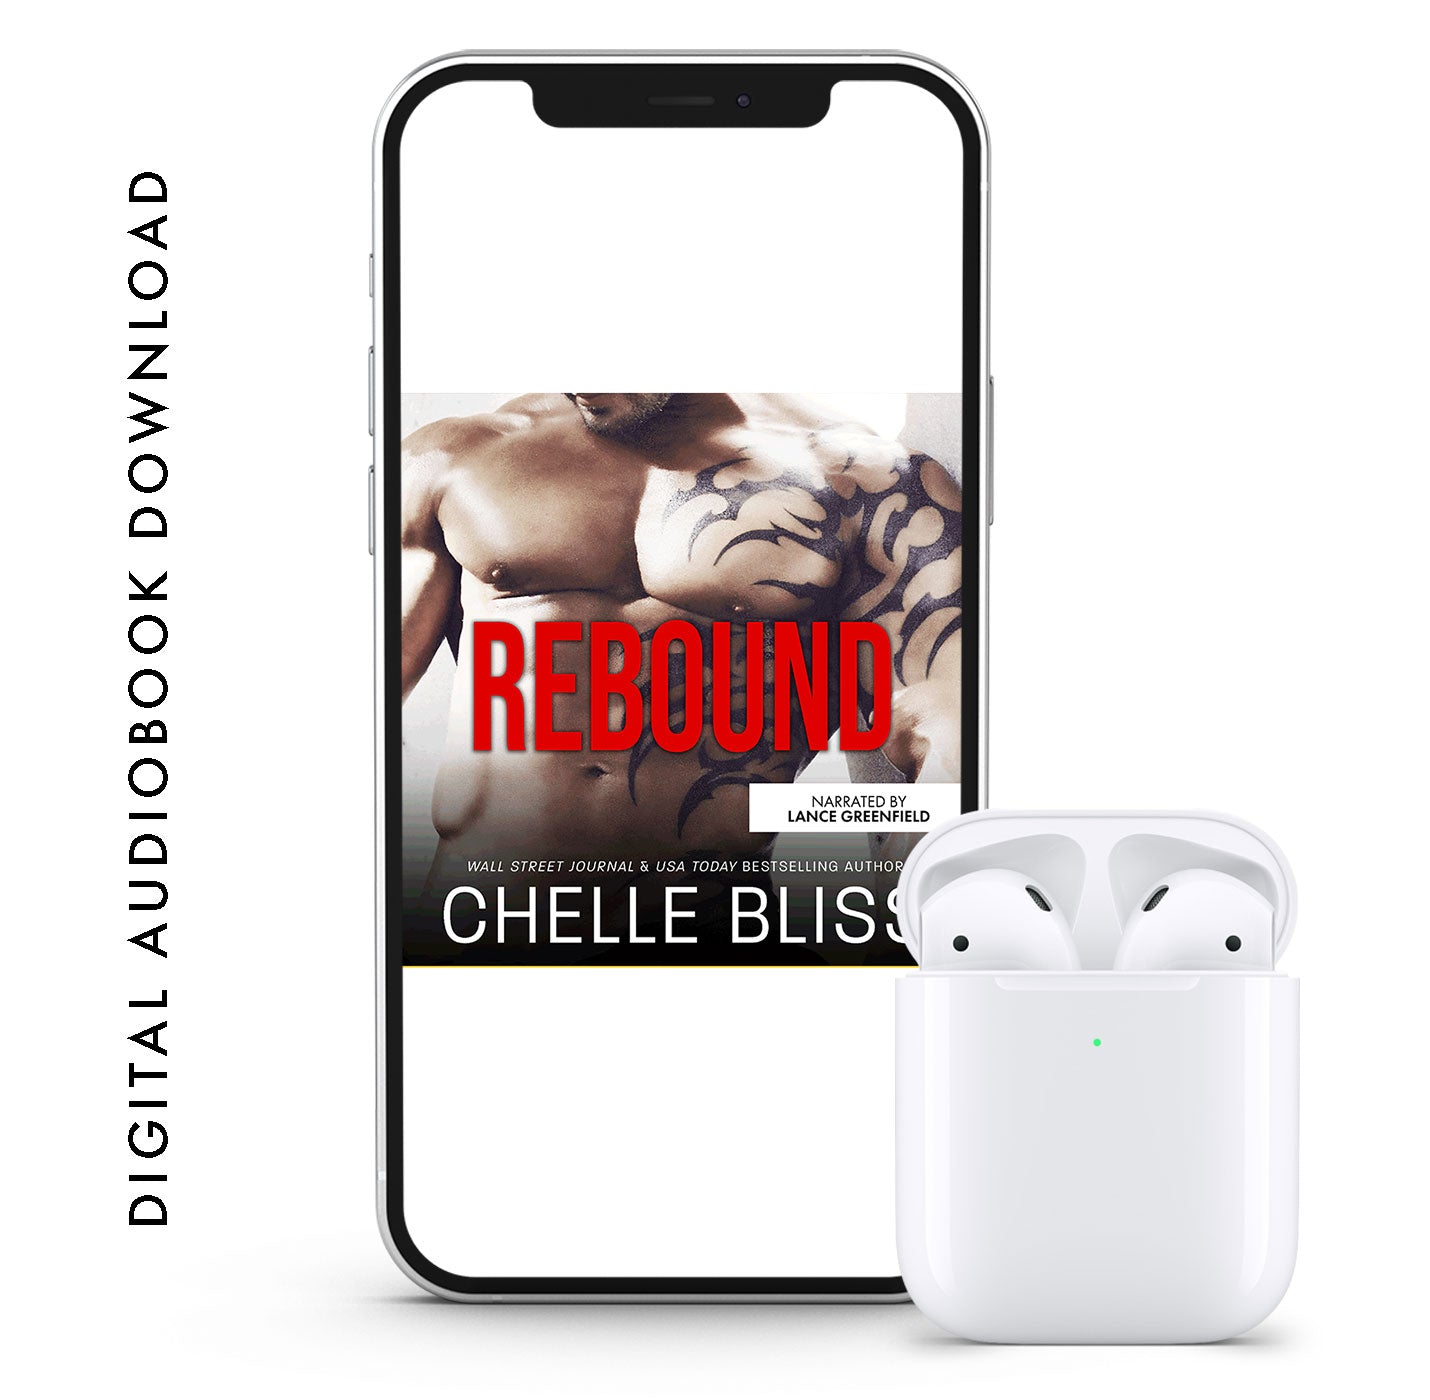 rebound audiobook by chelle bliss shirless tattoed man 